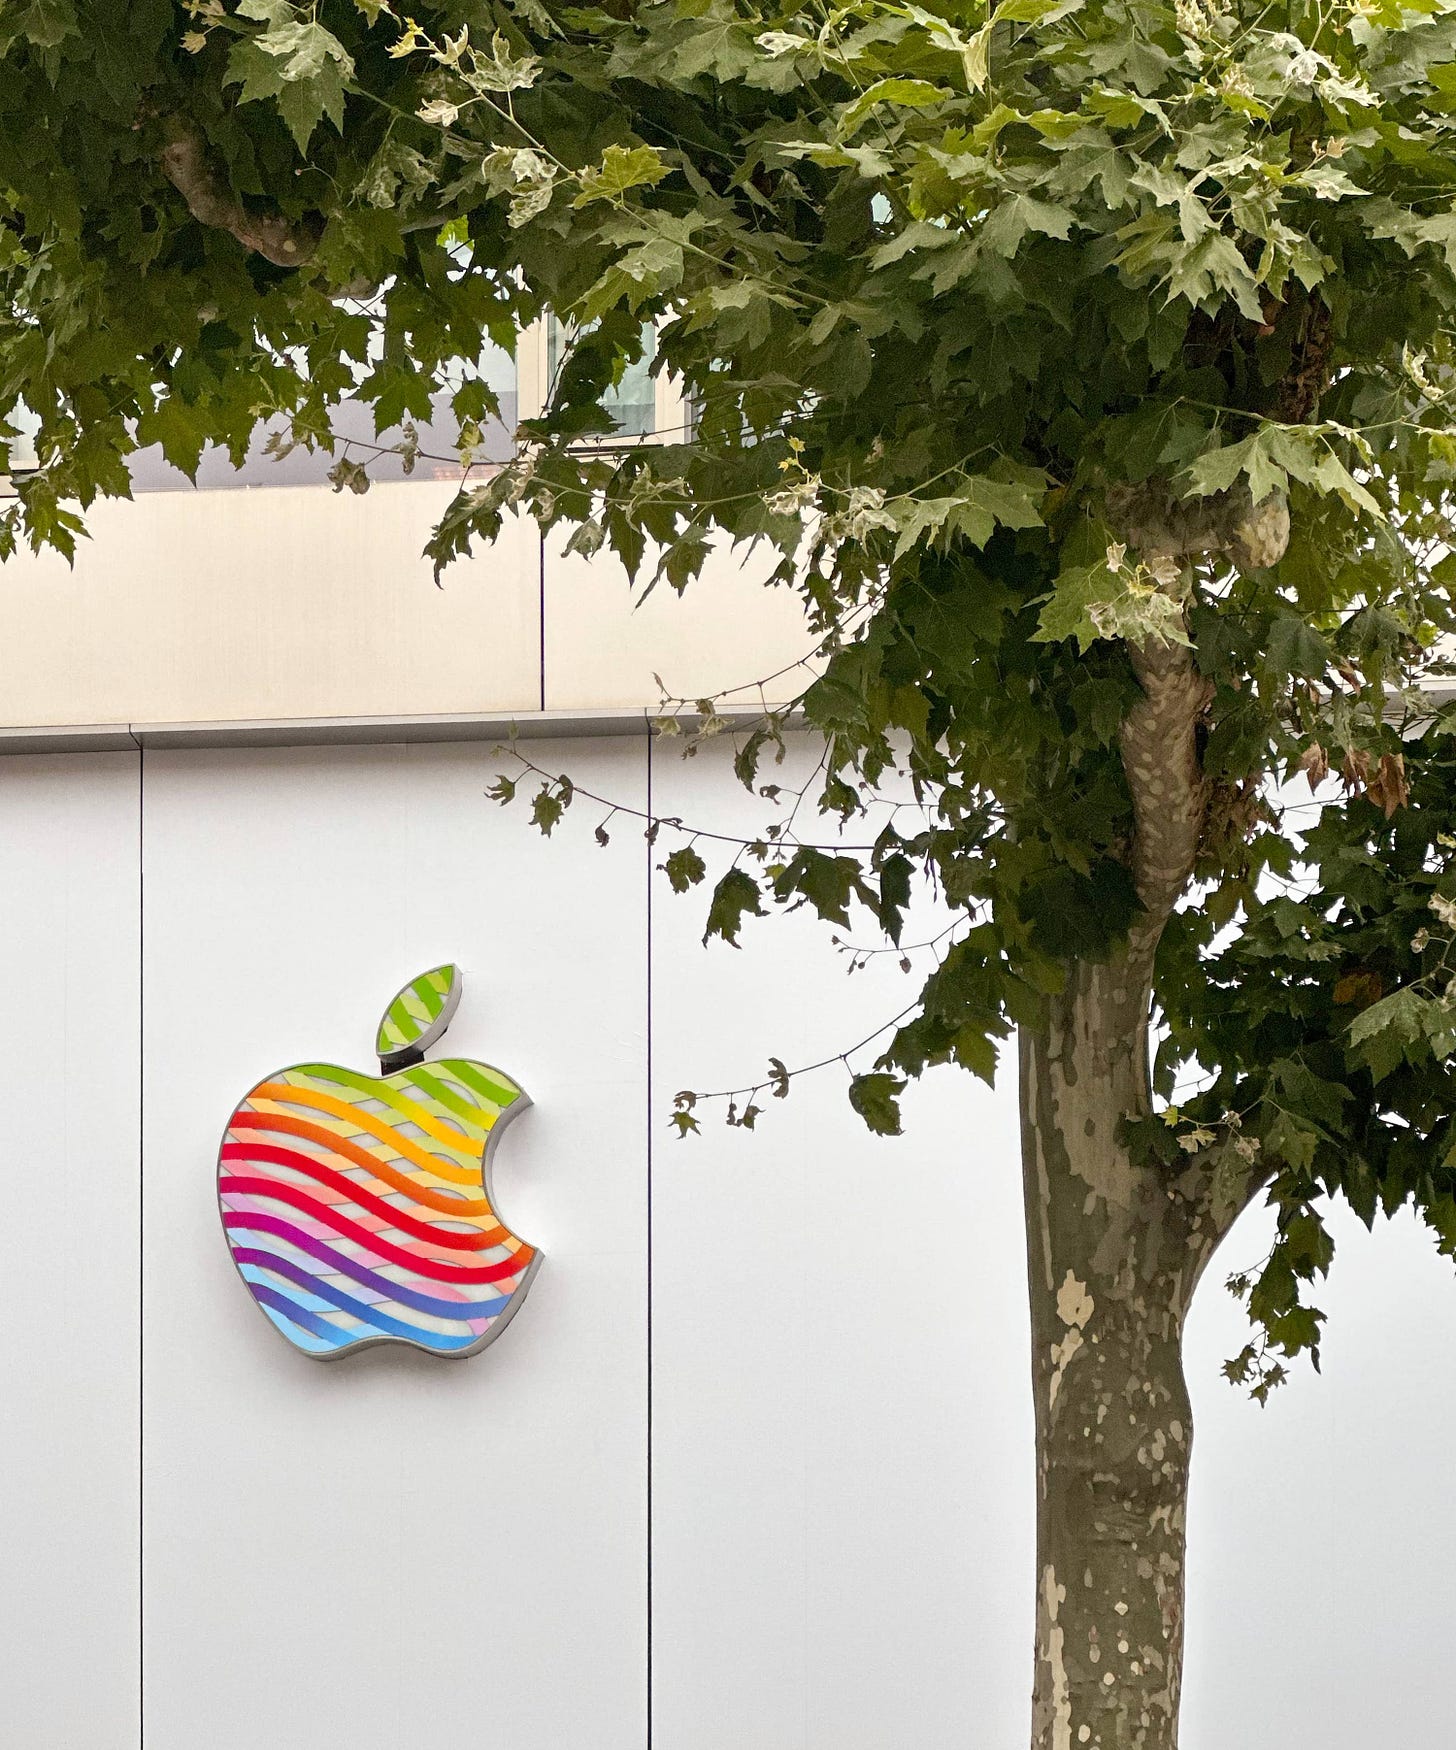 An exterior shot of the Apple Store in Frankfurt. There is a tree in the foreground, and the windows are wrapped with vinyl.